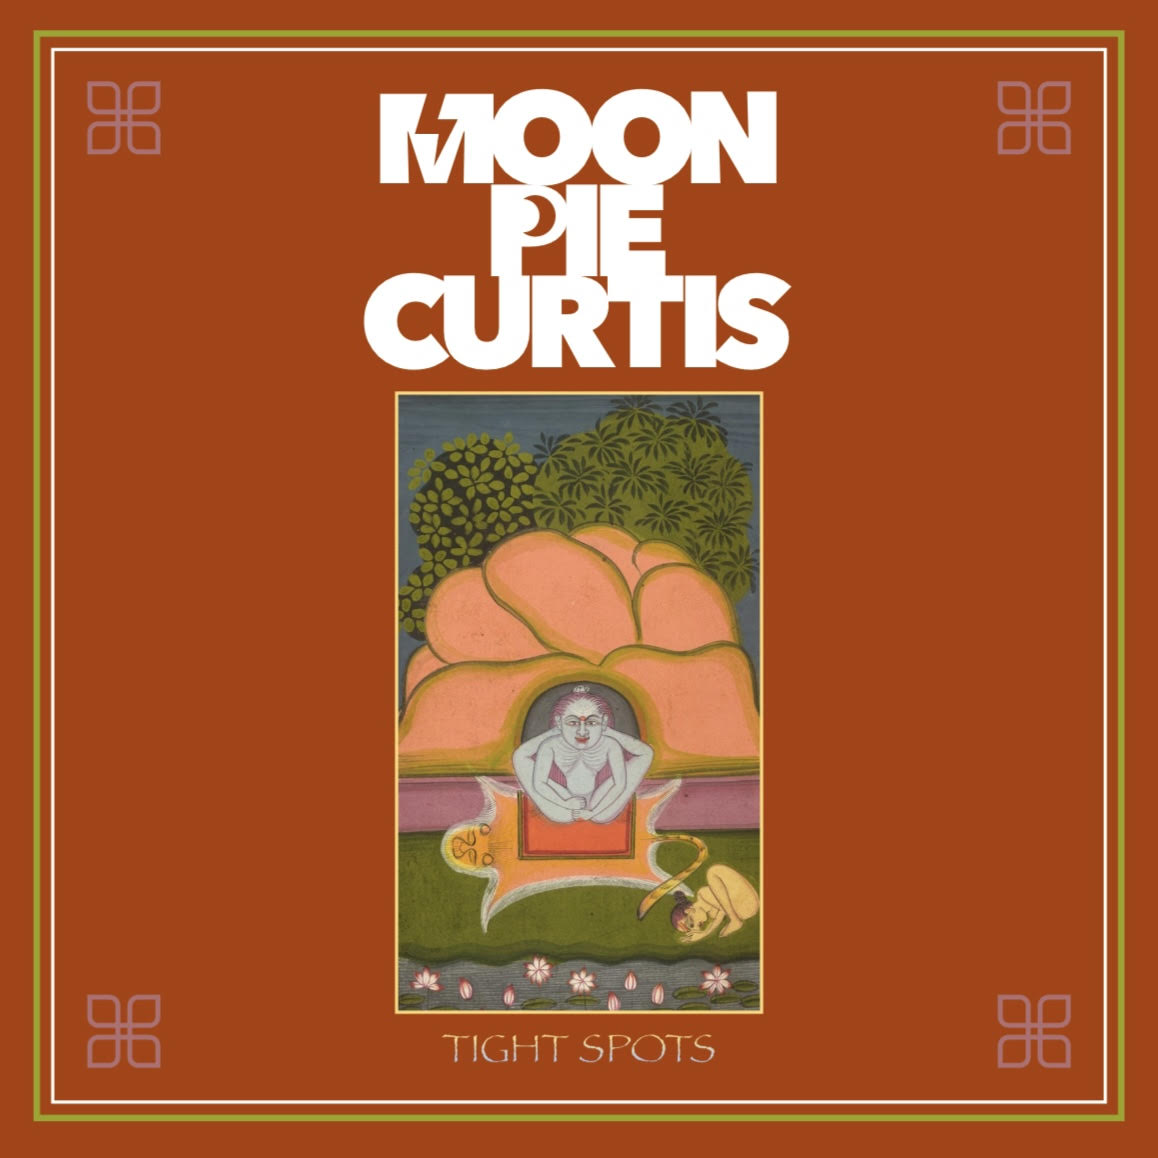 Tight Spots, Adult Situations, and Good Times: The Many Moods of Moon Pie  Curtis 